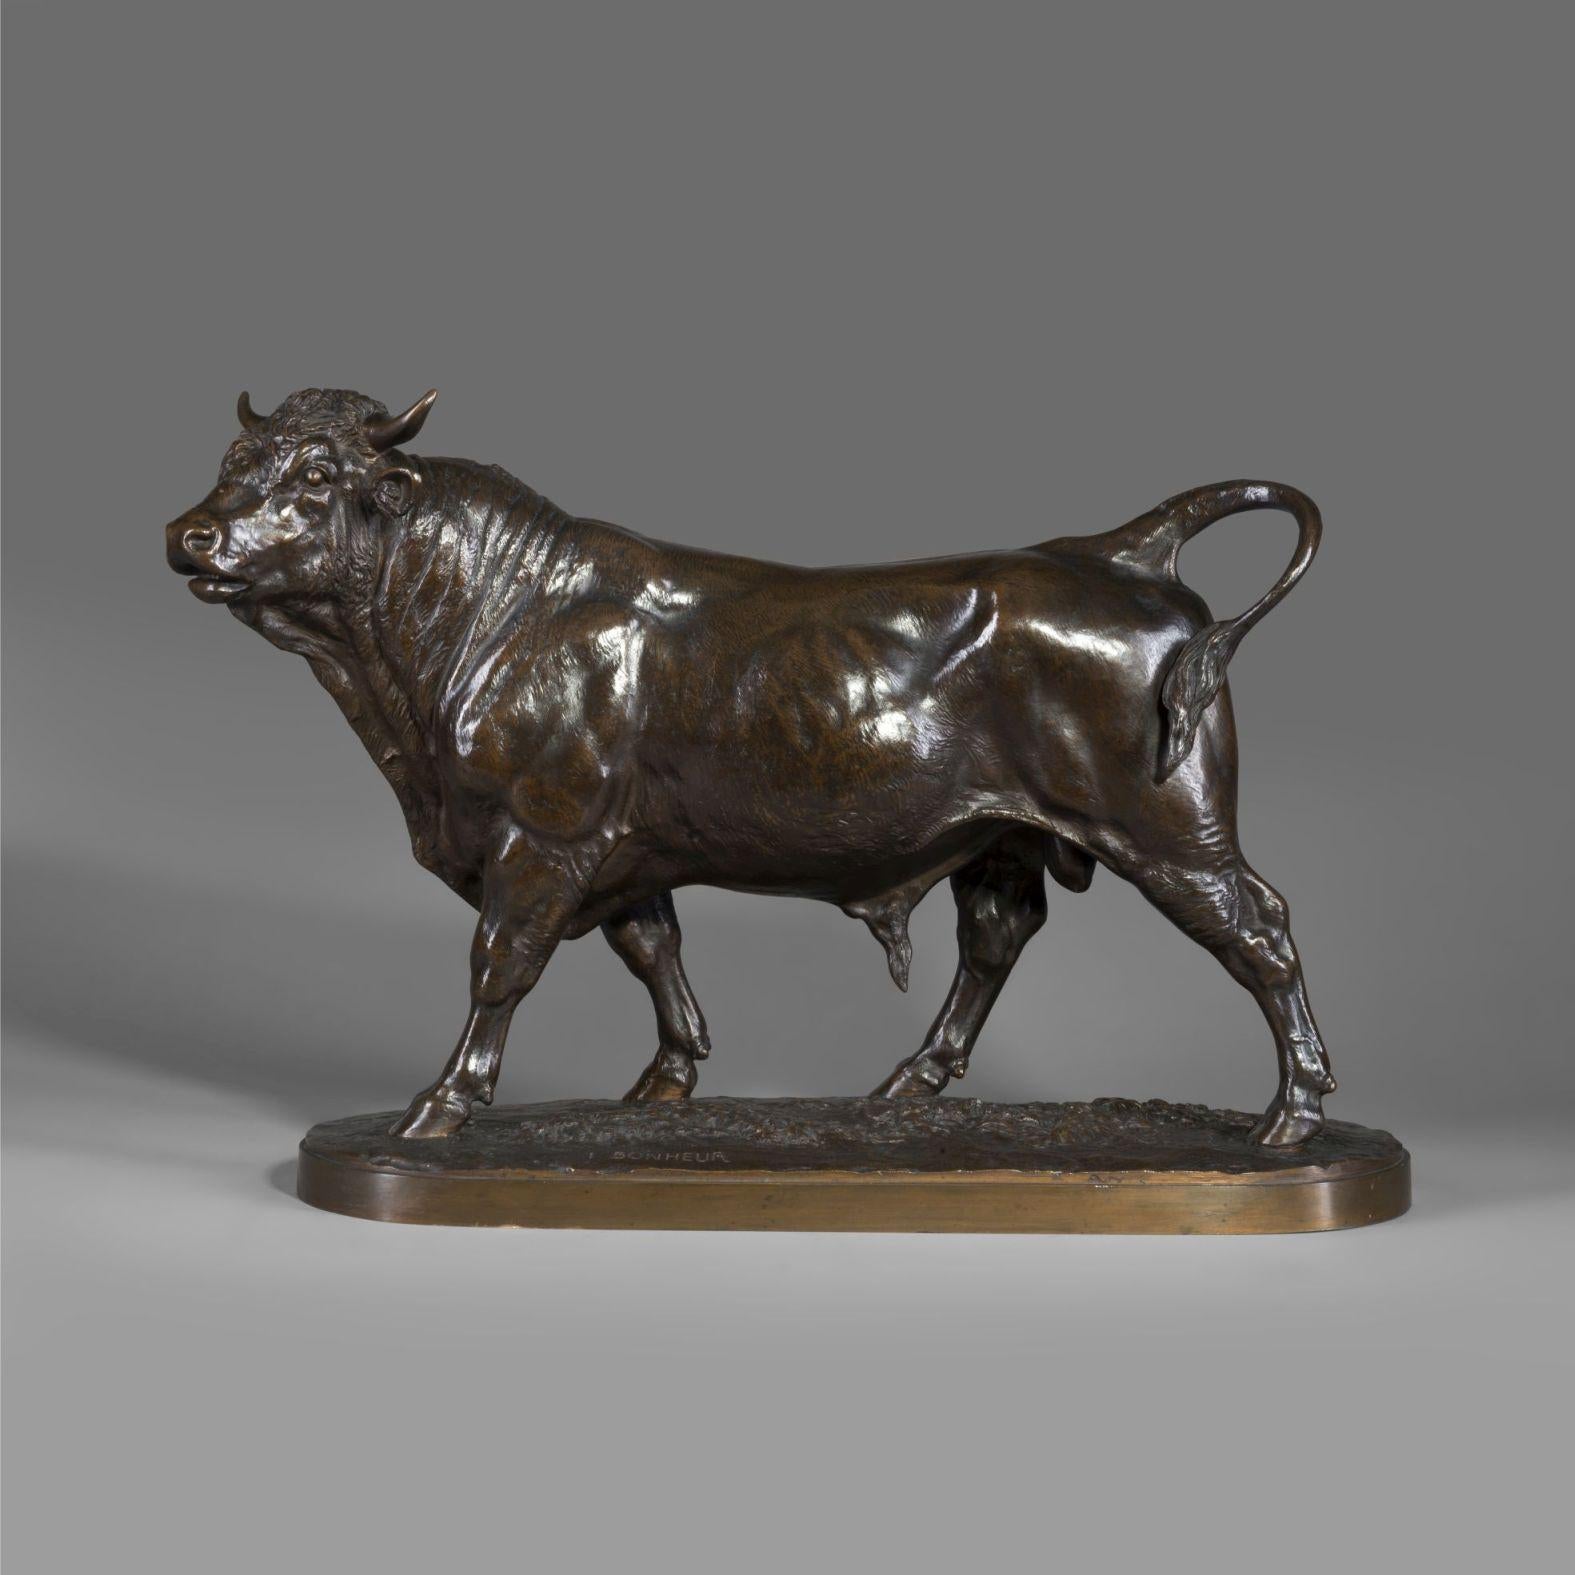 A pair of large and finely patinated bronze models of a standing bull and a running cow after models by Isidor-Jules Bonheur, Cast on a Naturalistic Base. 

French, circa 1890.

Signed 'I BONHEUR' and stamped 'PEYROL EDITEUR'.

Bonheur was a